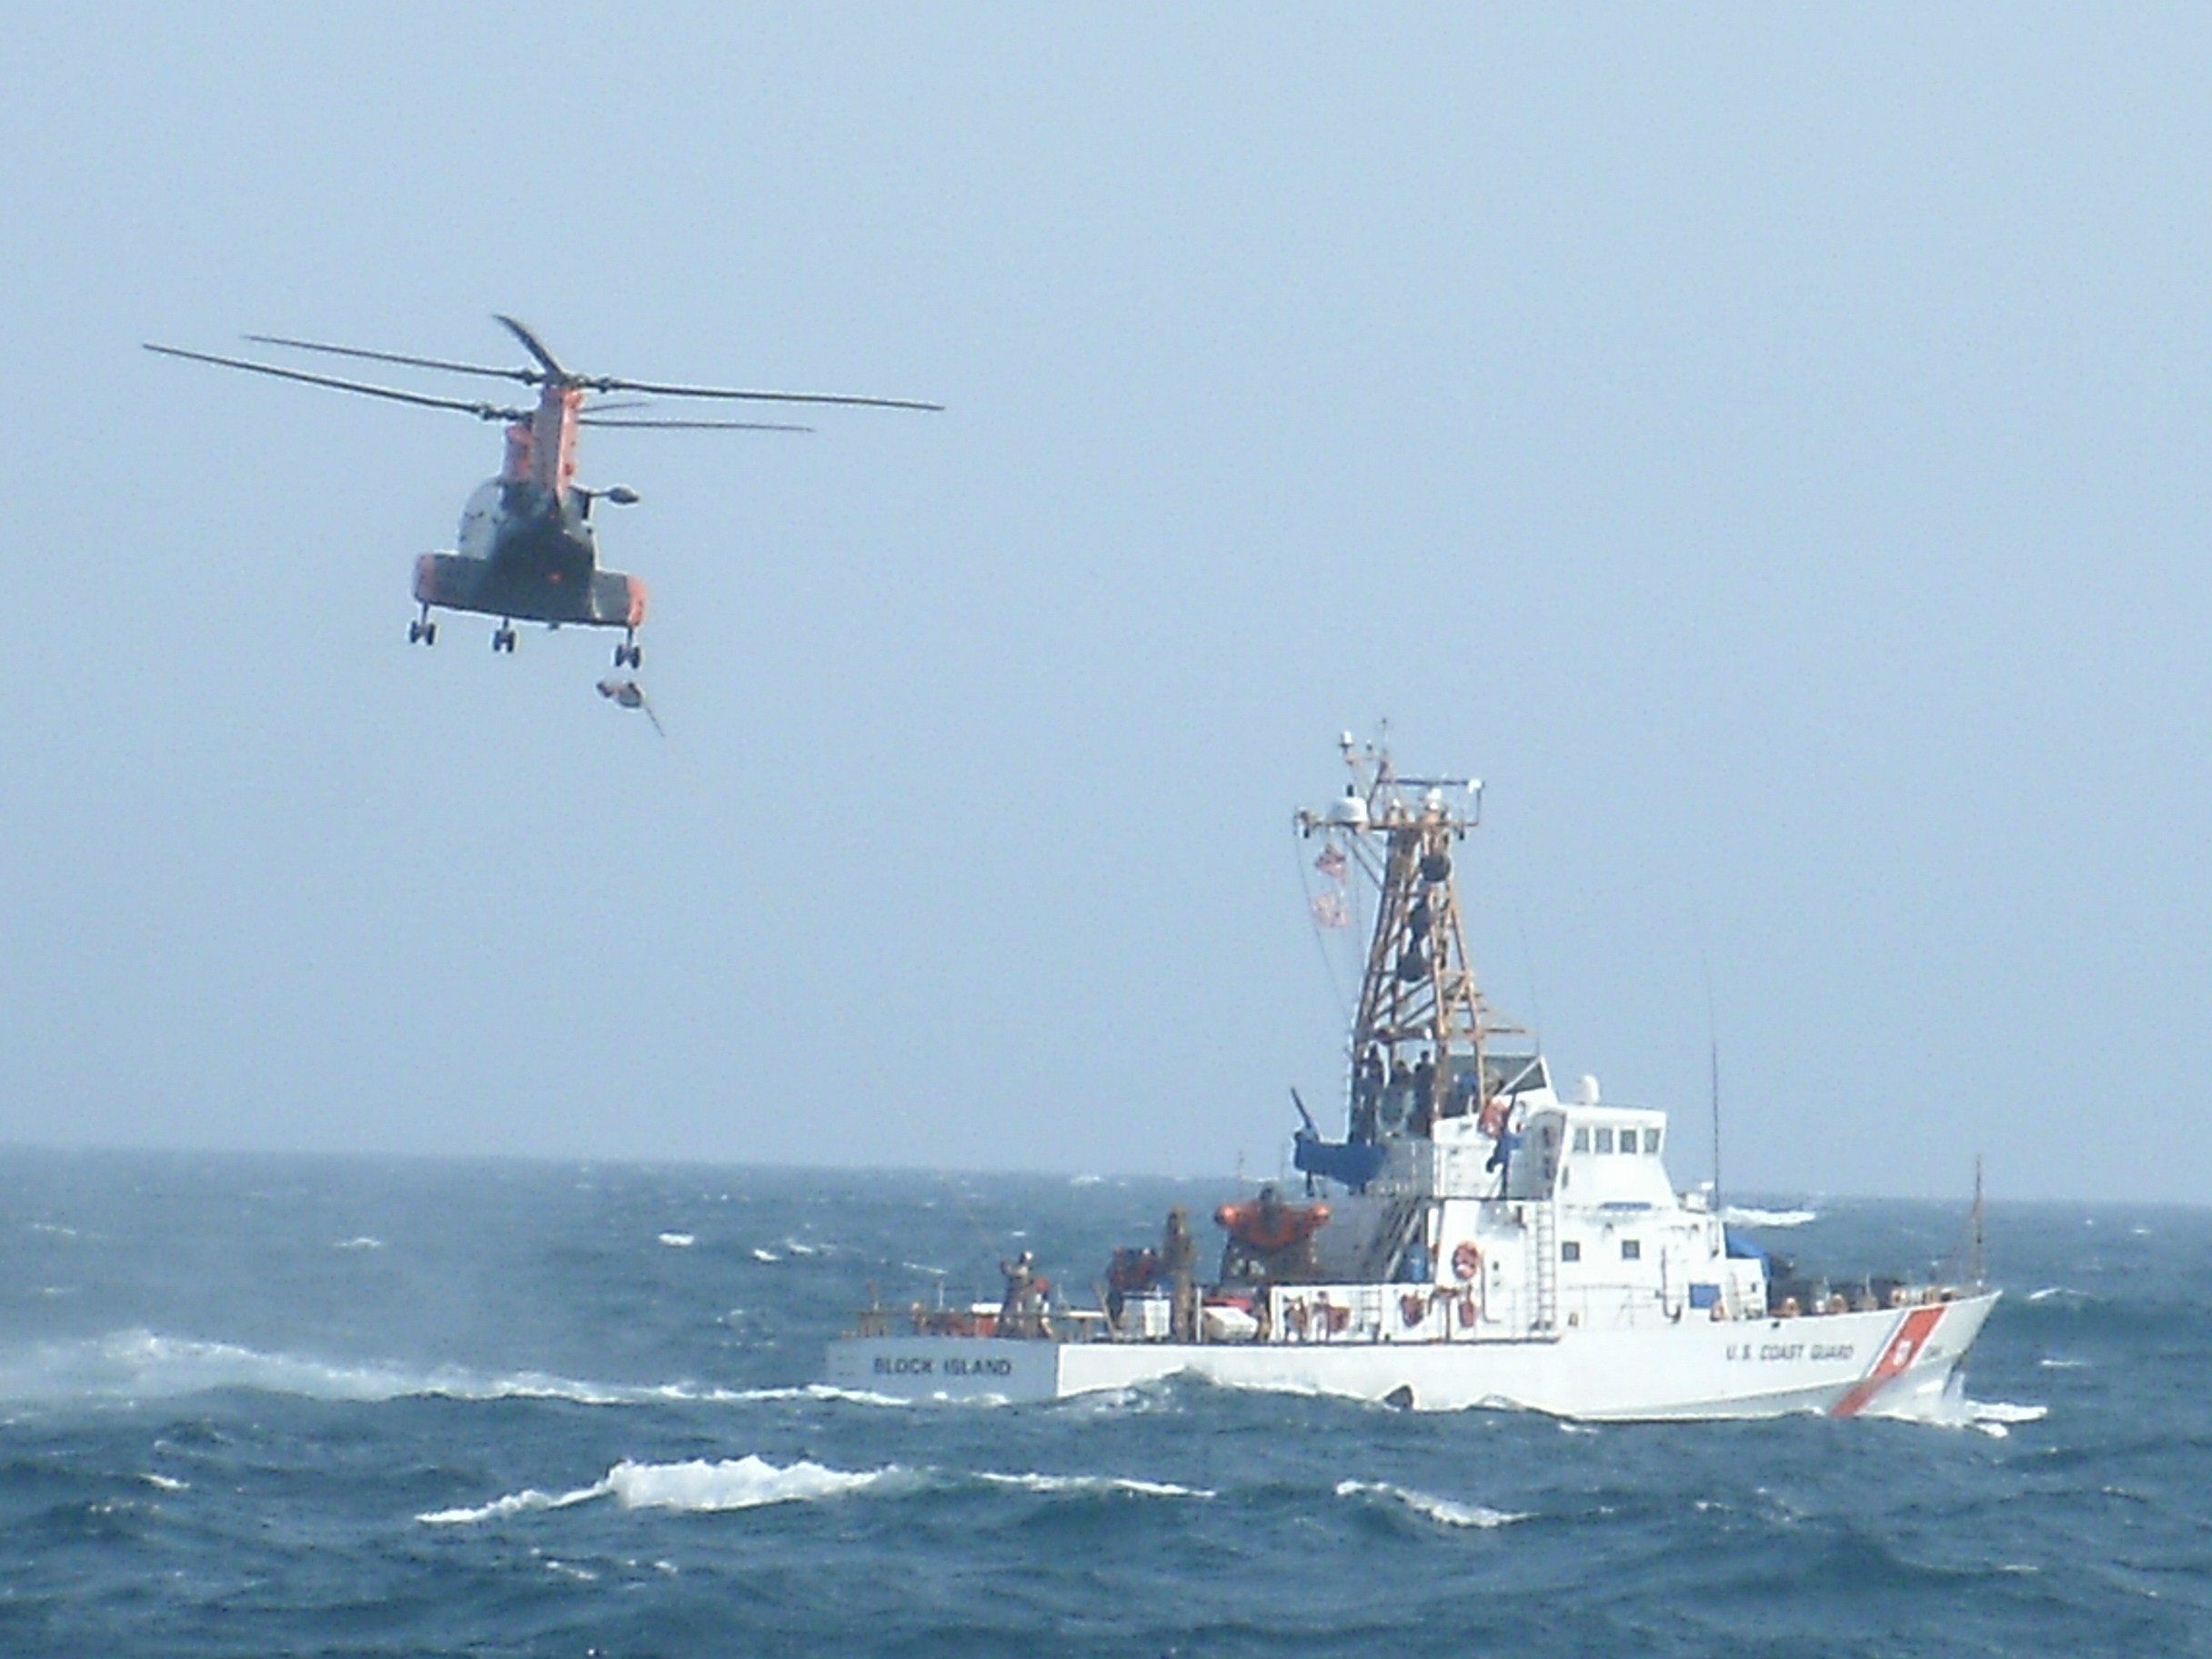 2432x1824 File:United States Coast Guard Cutter Block Island and Helicopter.jpg